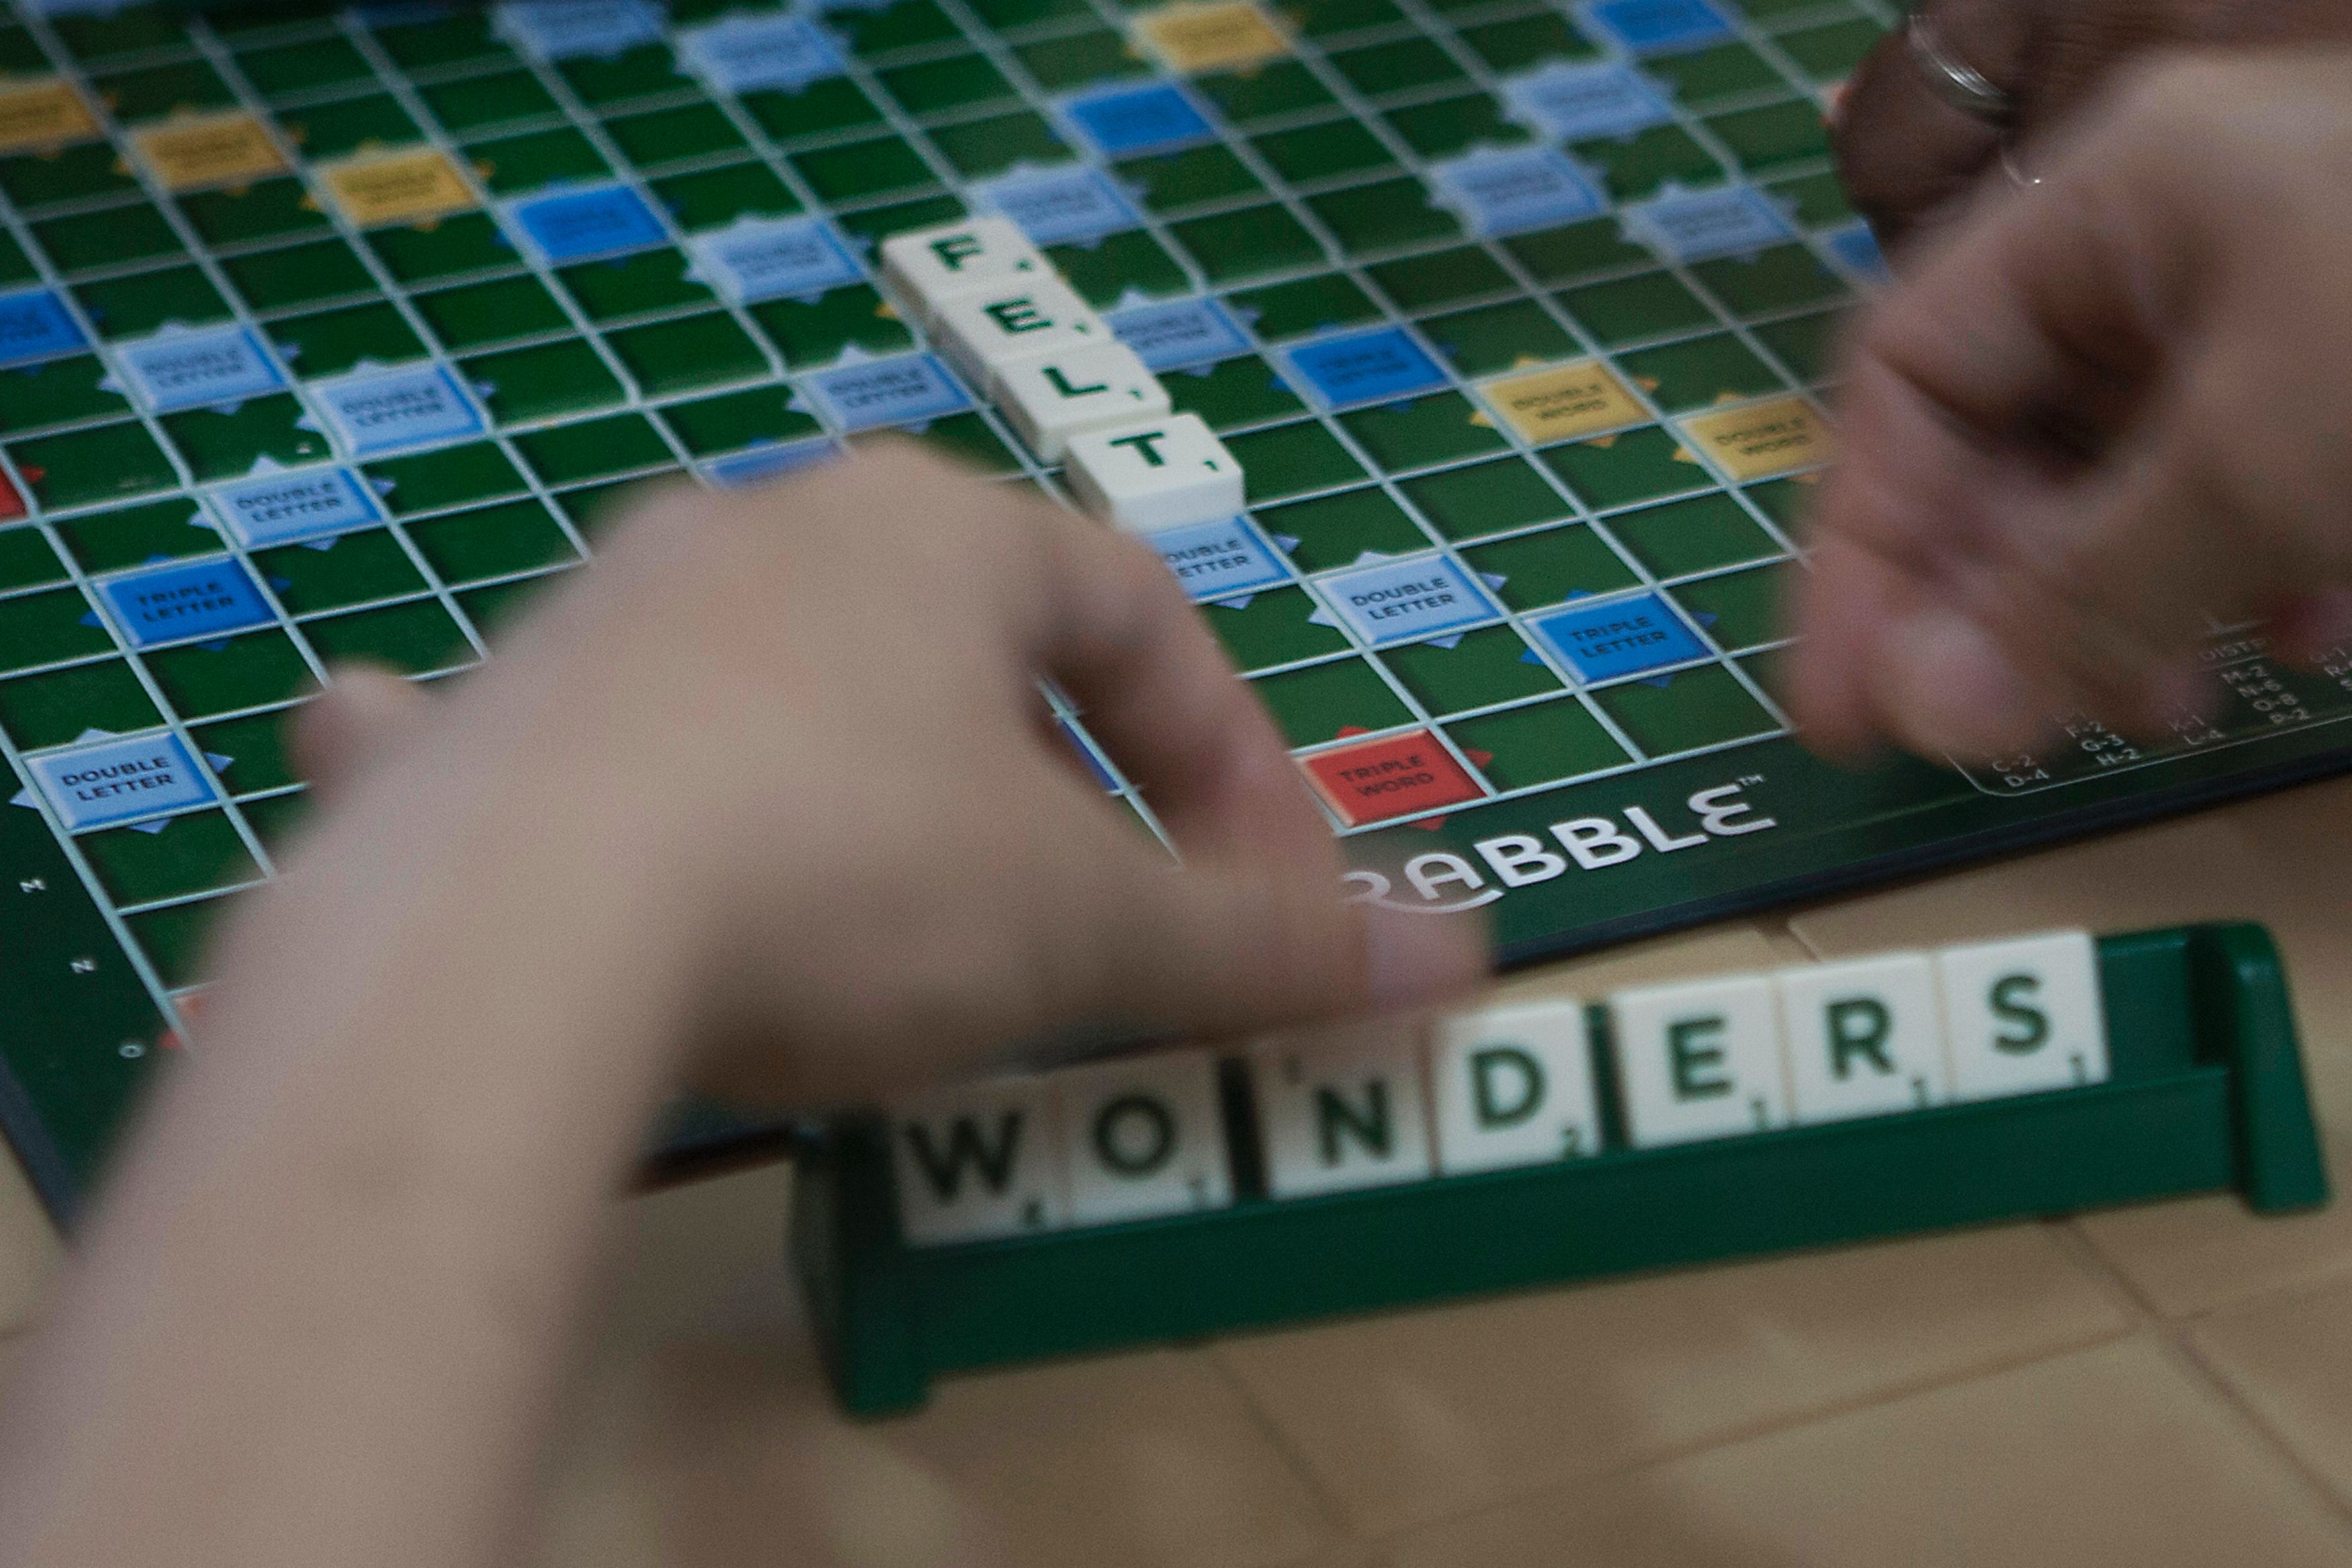 A game of scrabble.